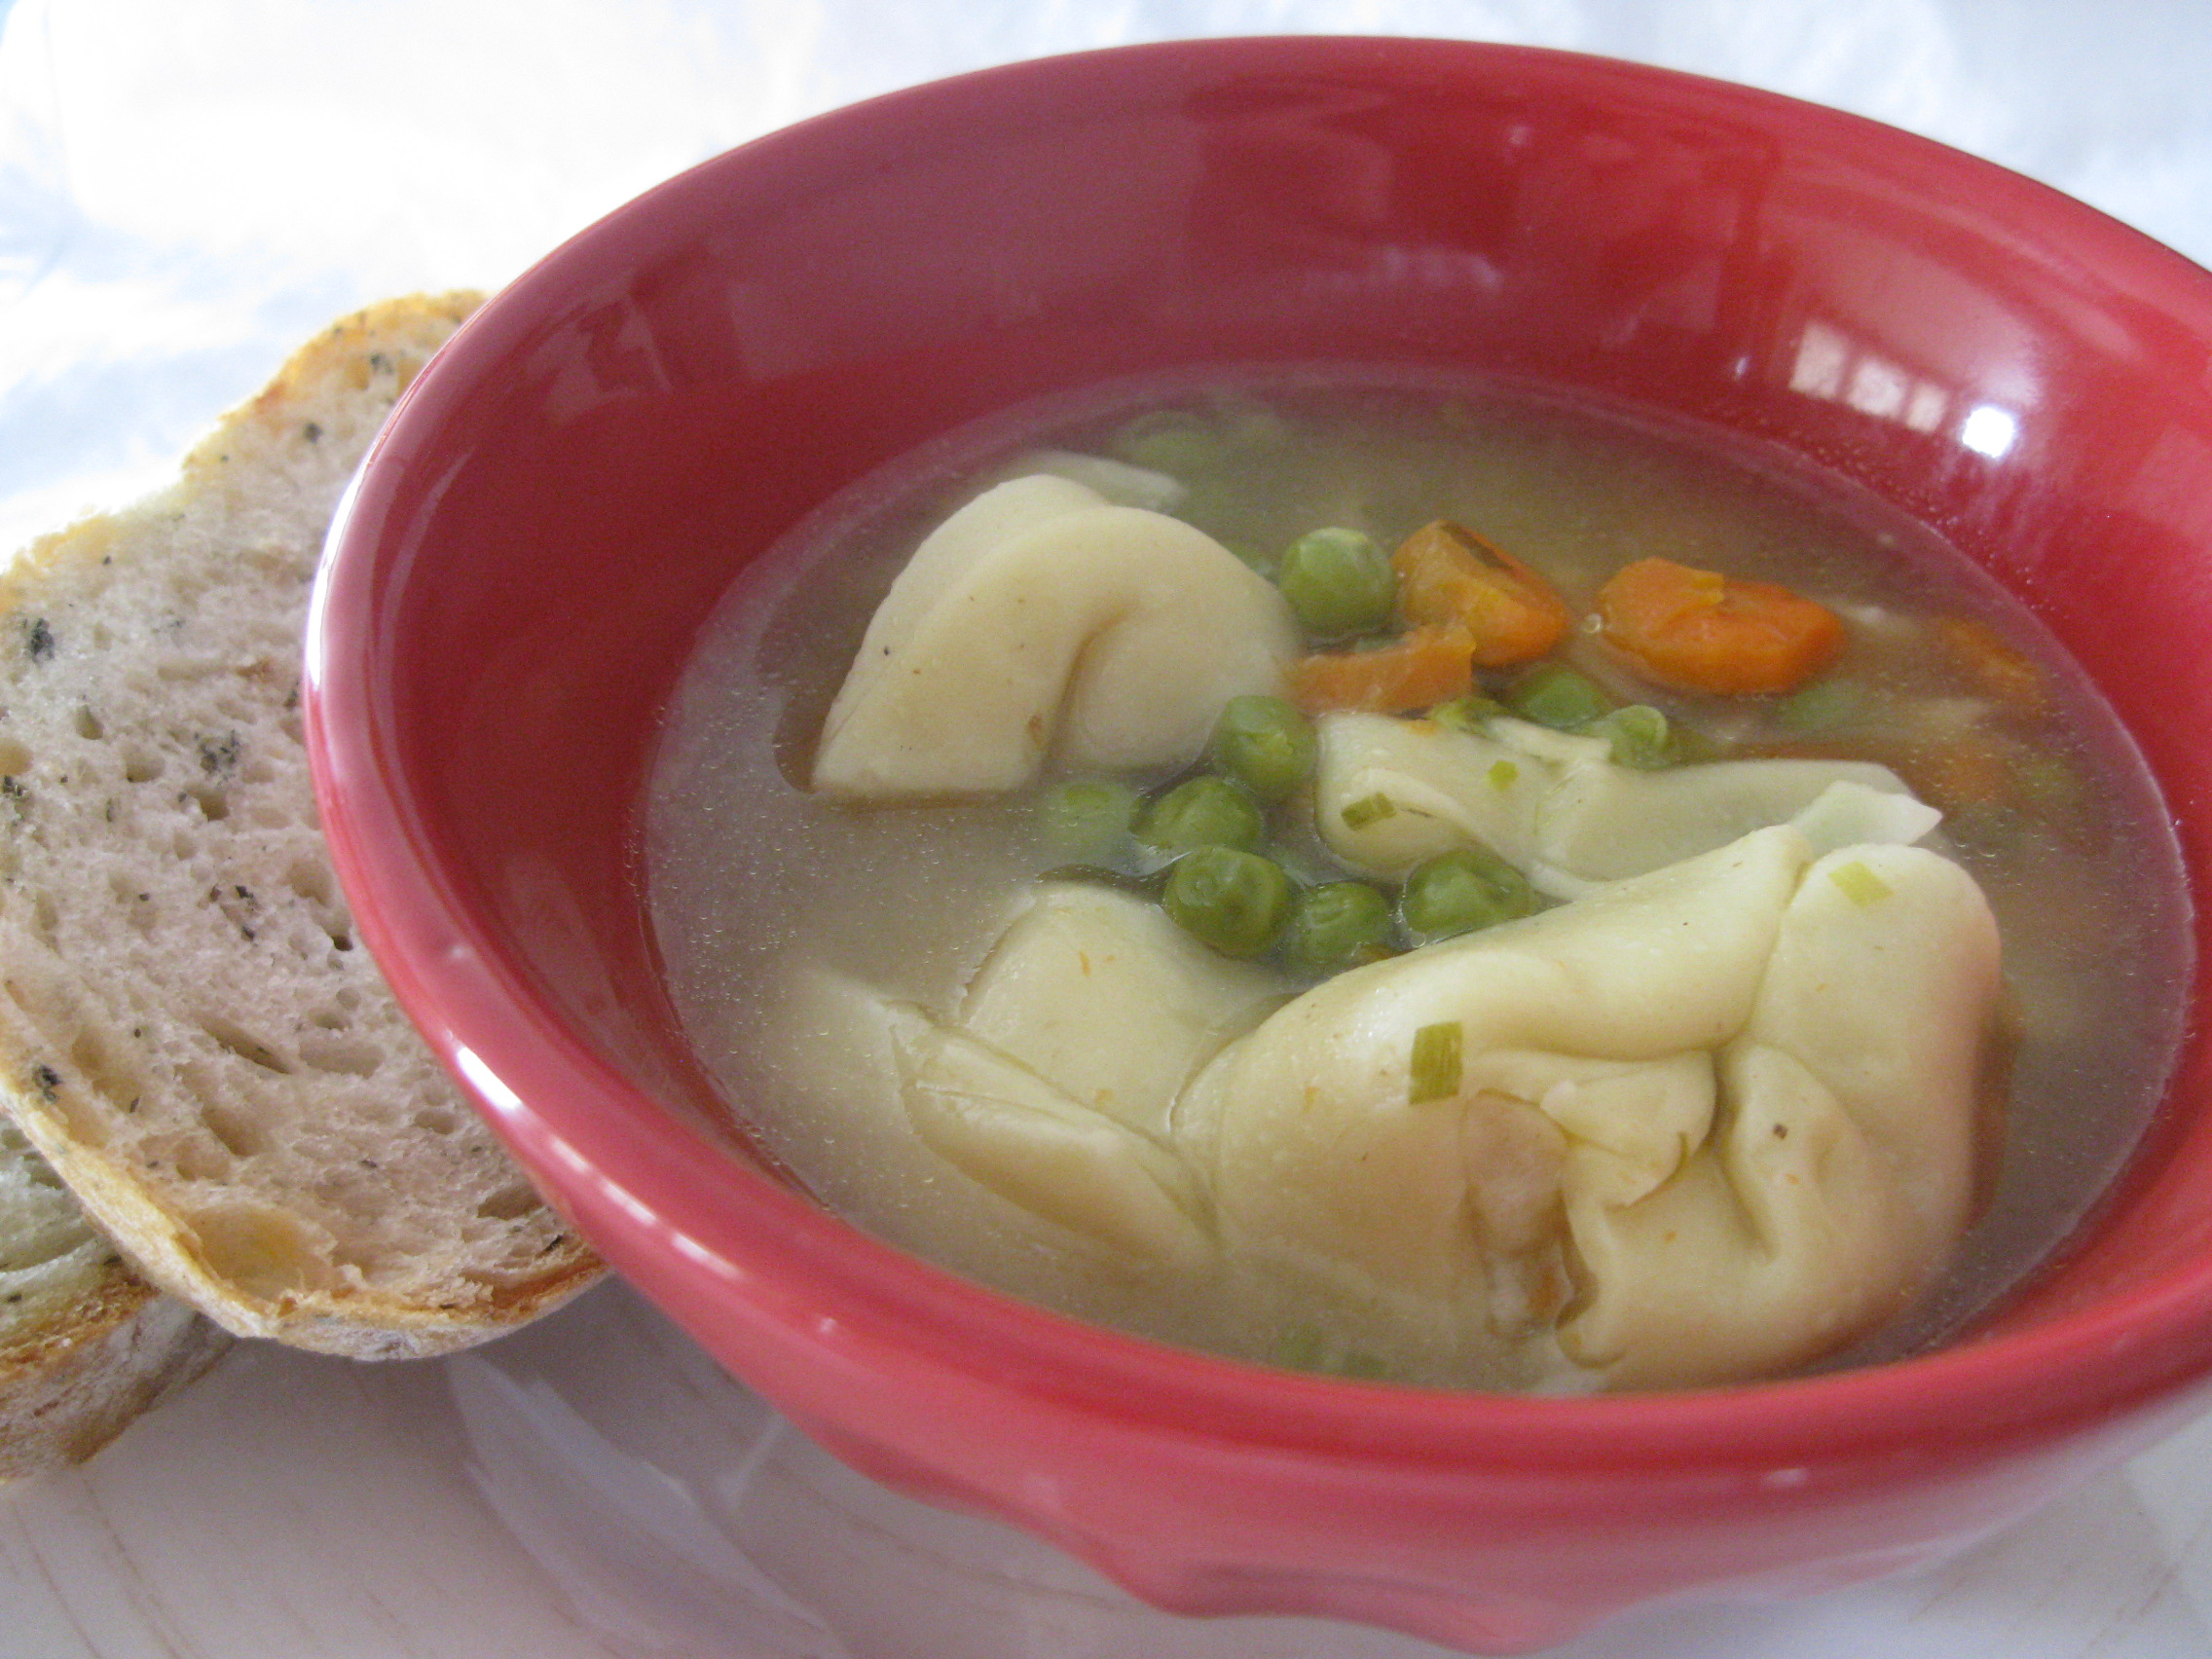 tortellini soup with carrots, peas and leeks